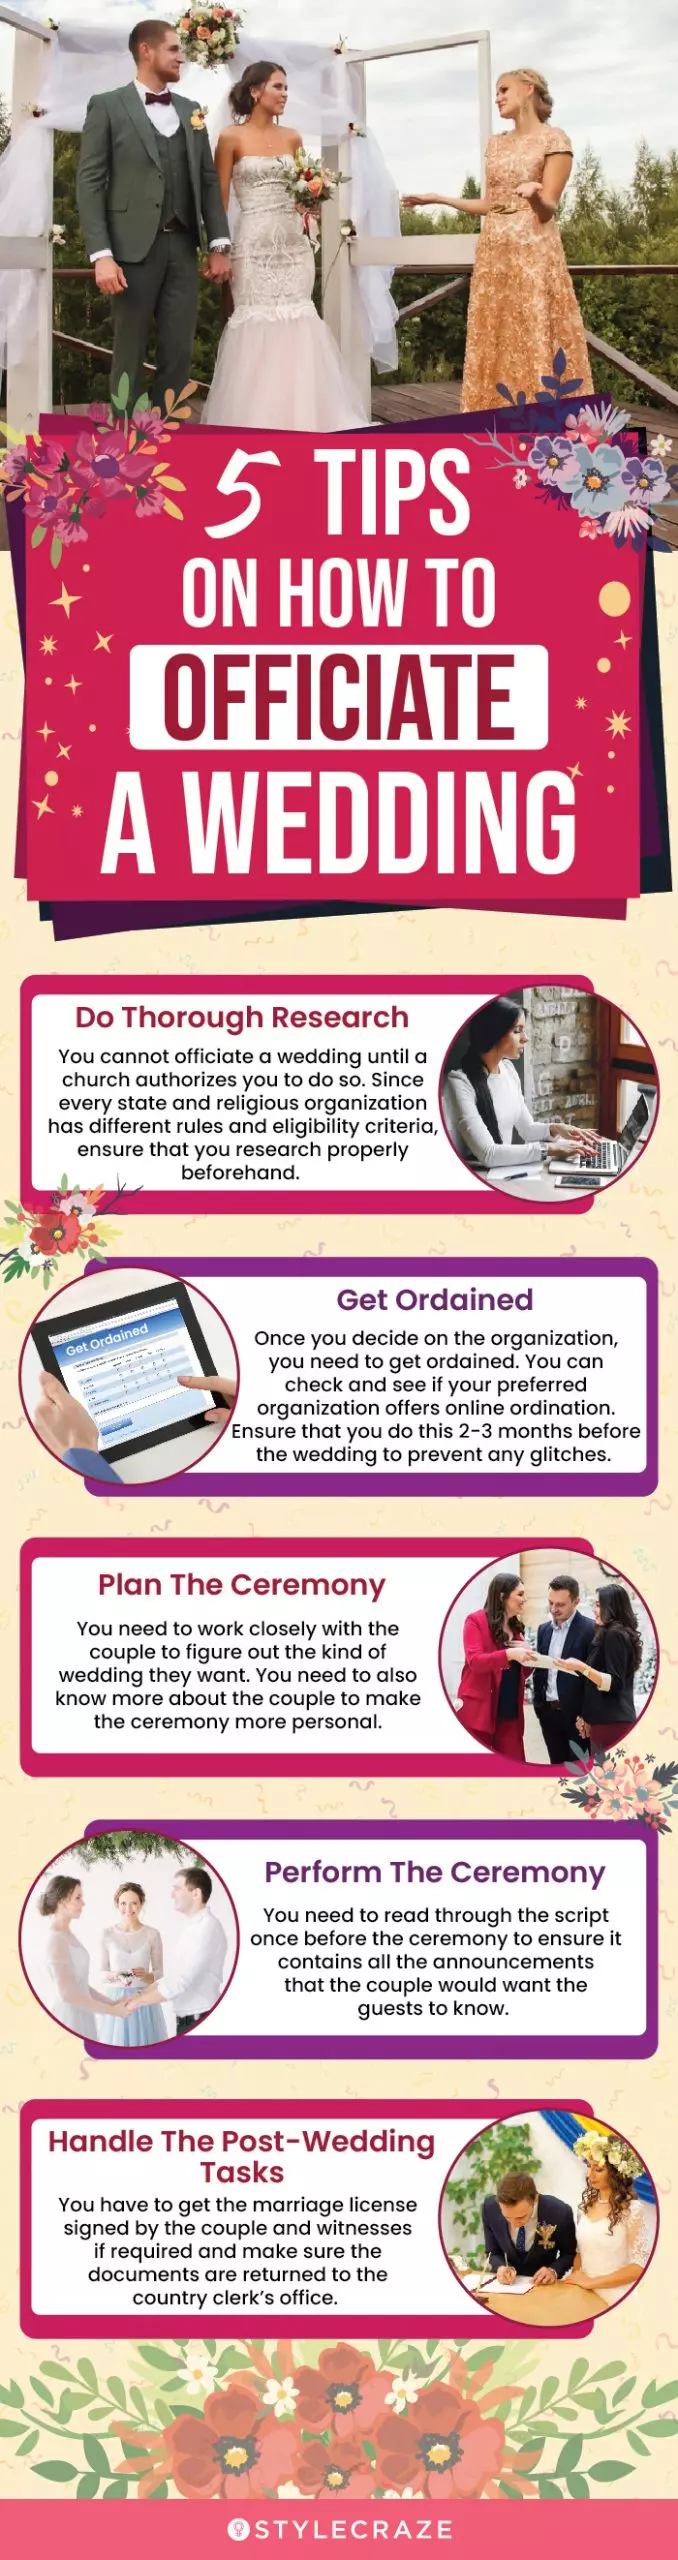 5 tips on how to officiate a wedding (infographic)